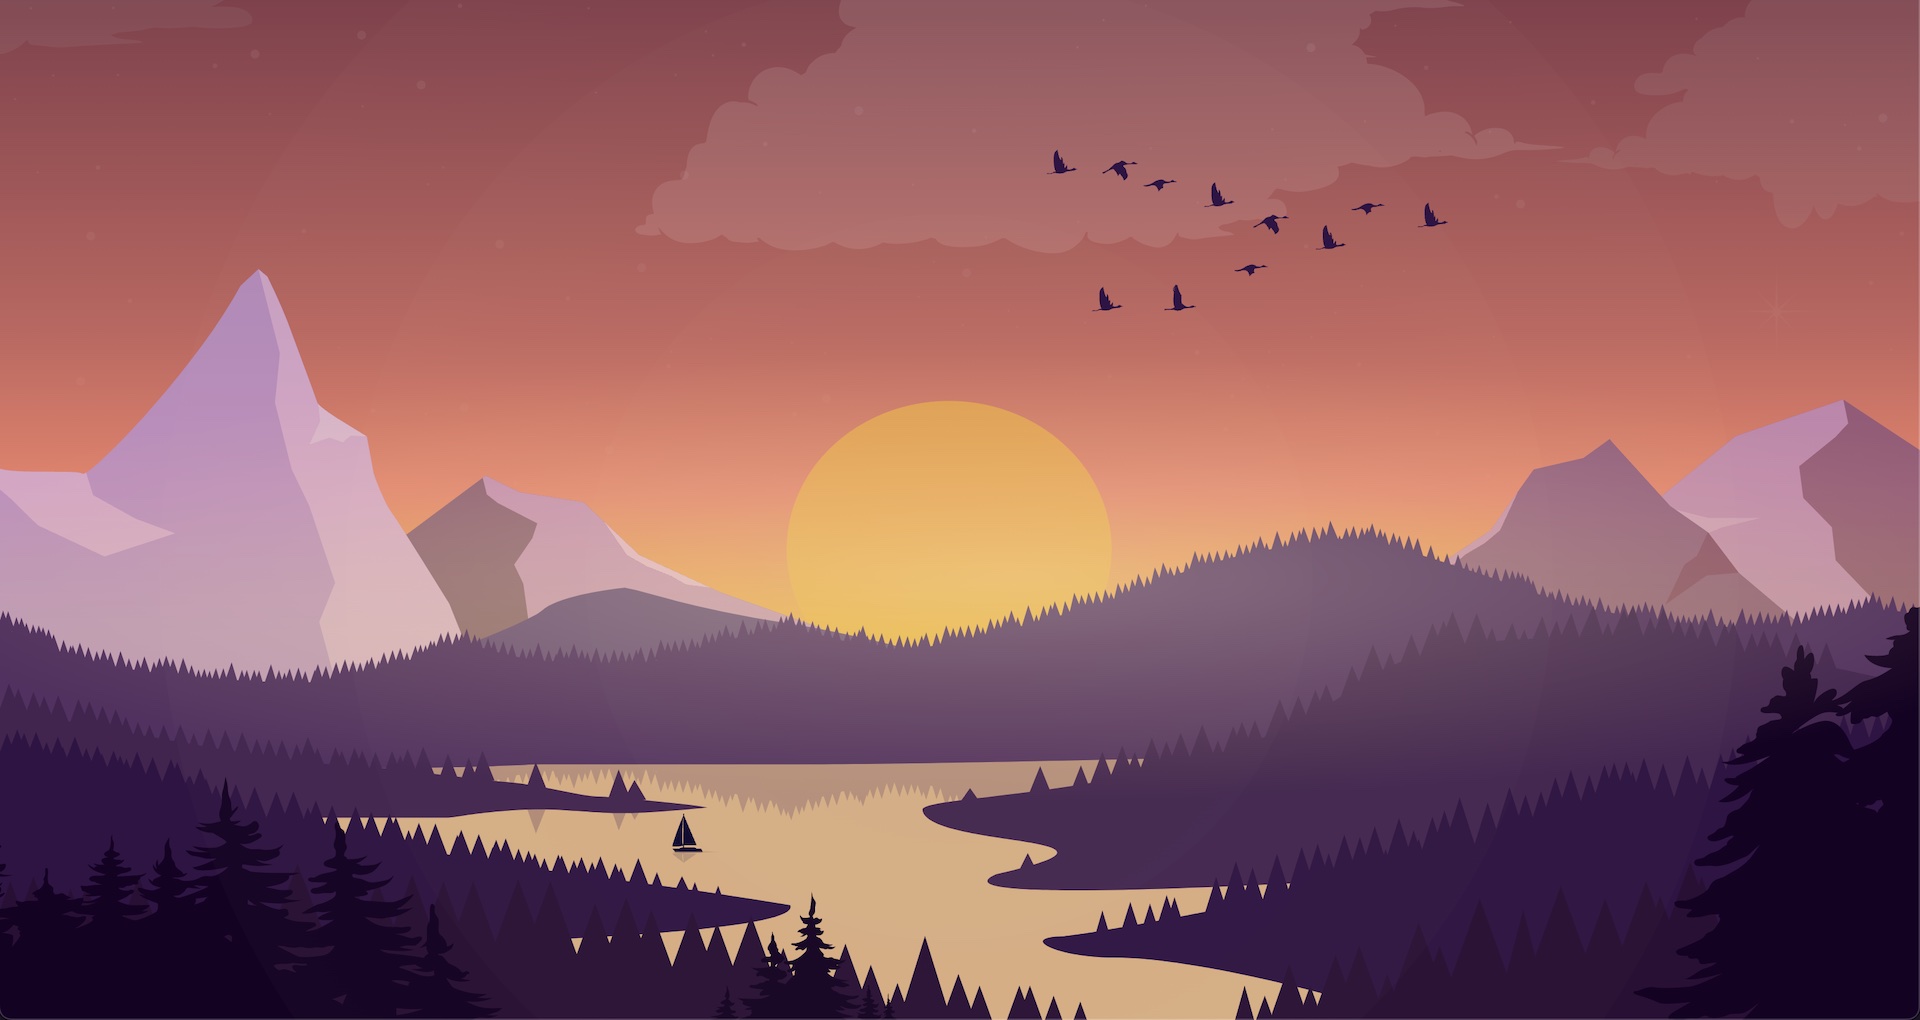 A preview of the lake illustration set to evening time